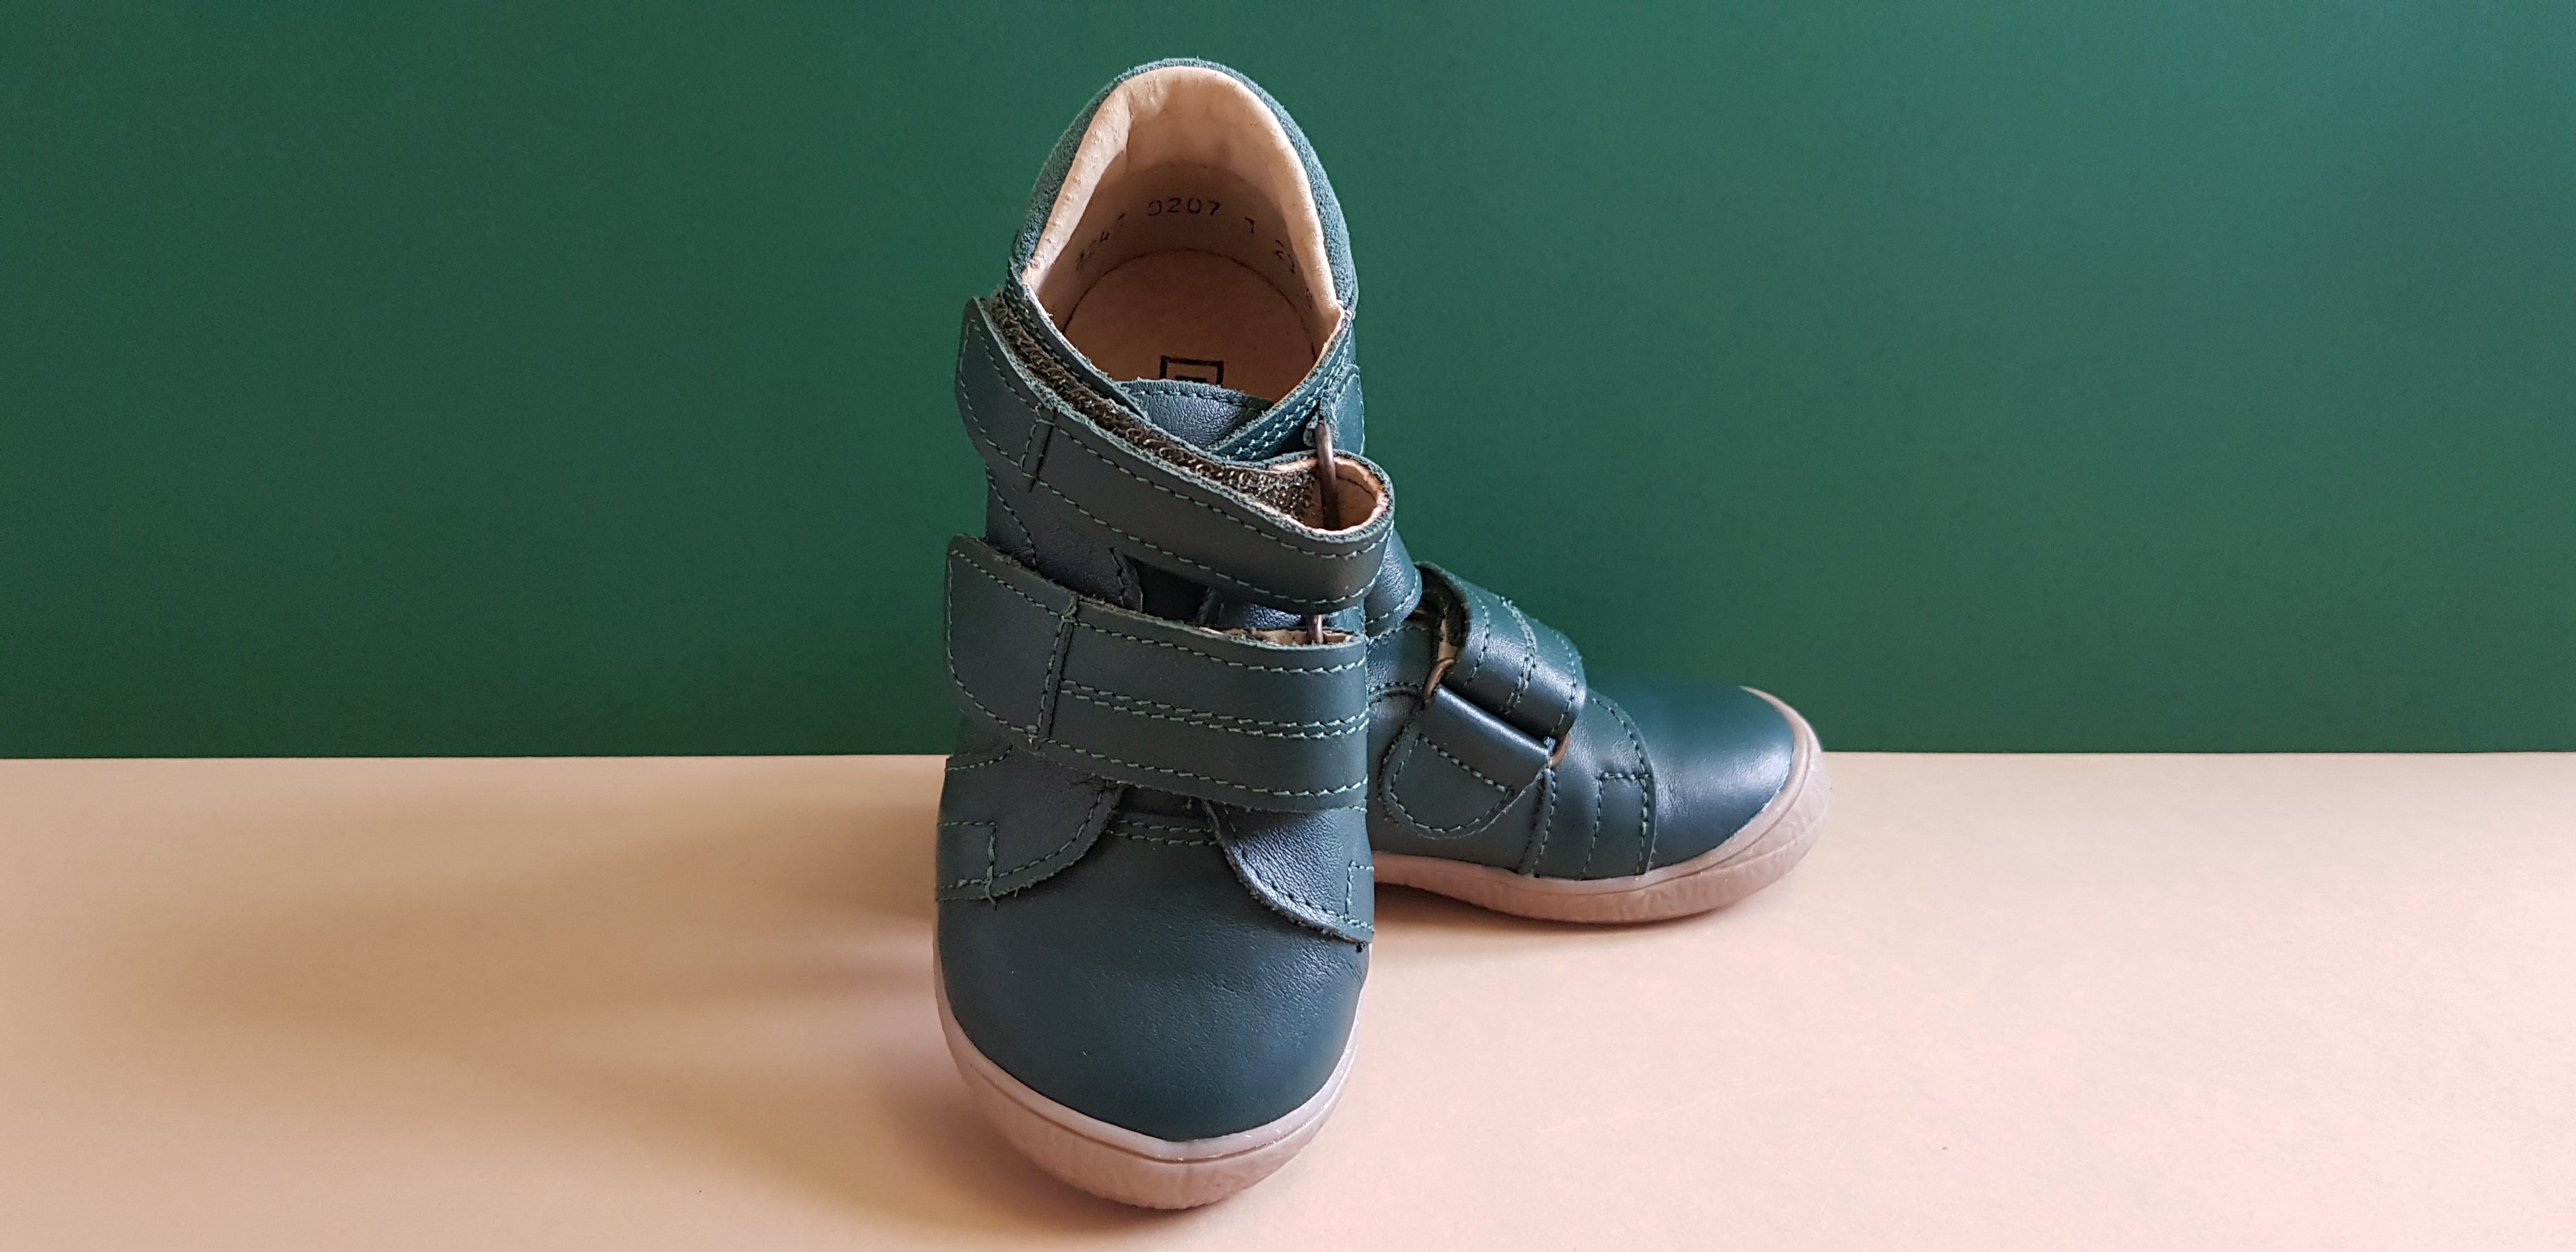 Dark Green Handmade High-quality Kids Shoes with brown sole, hook-and-loop fasteners and round toe box